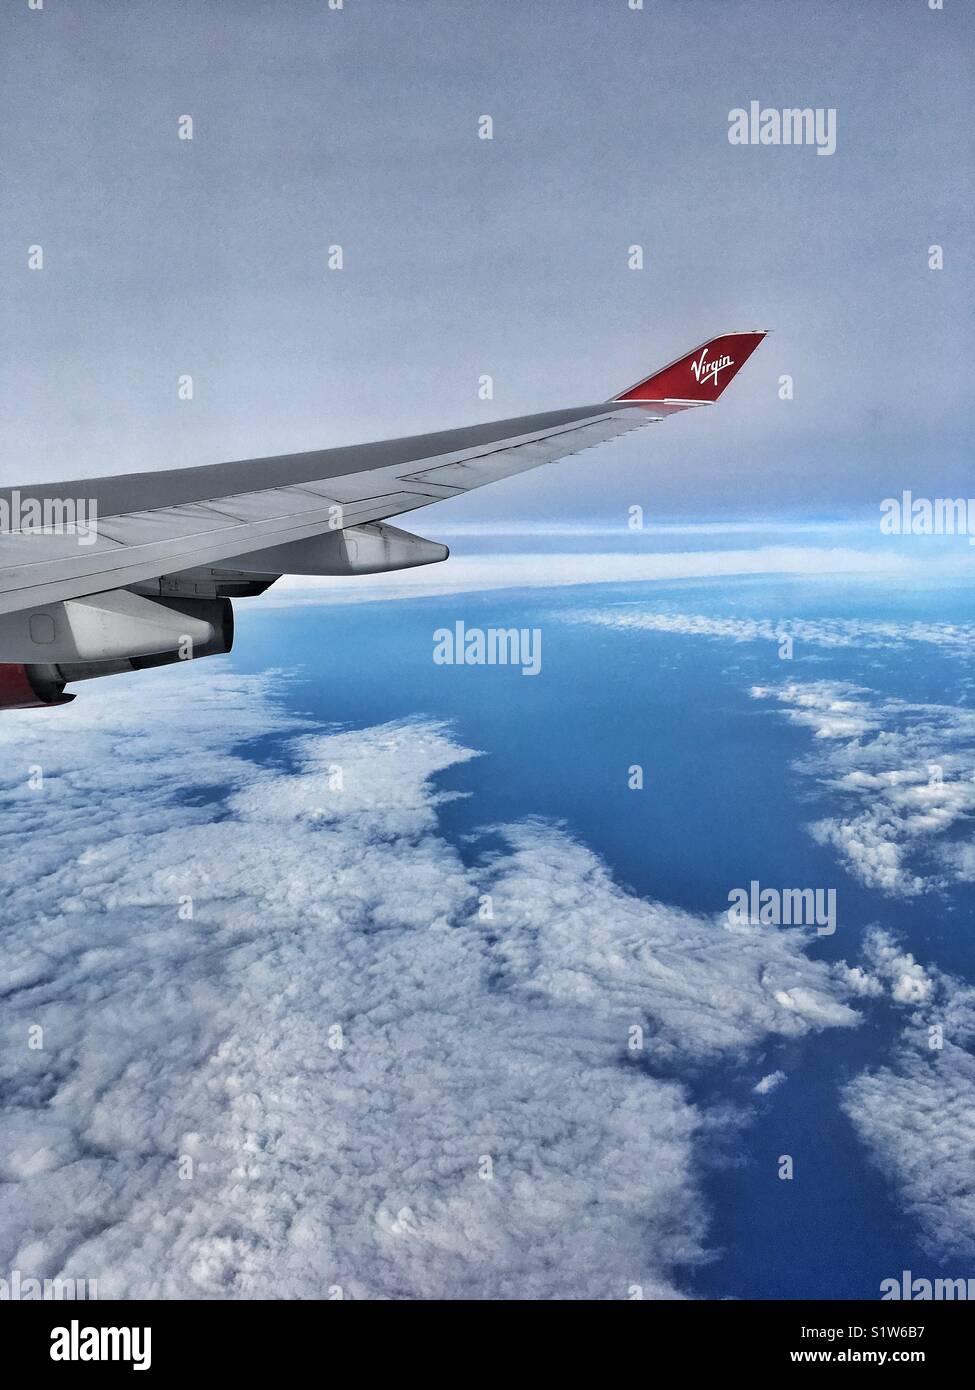 View out over the wing of a Virgin Atlantic airliner Stock Photo